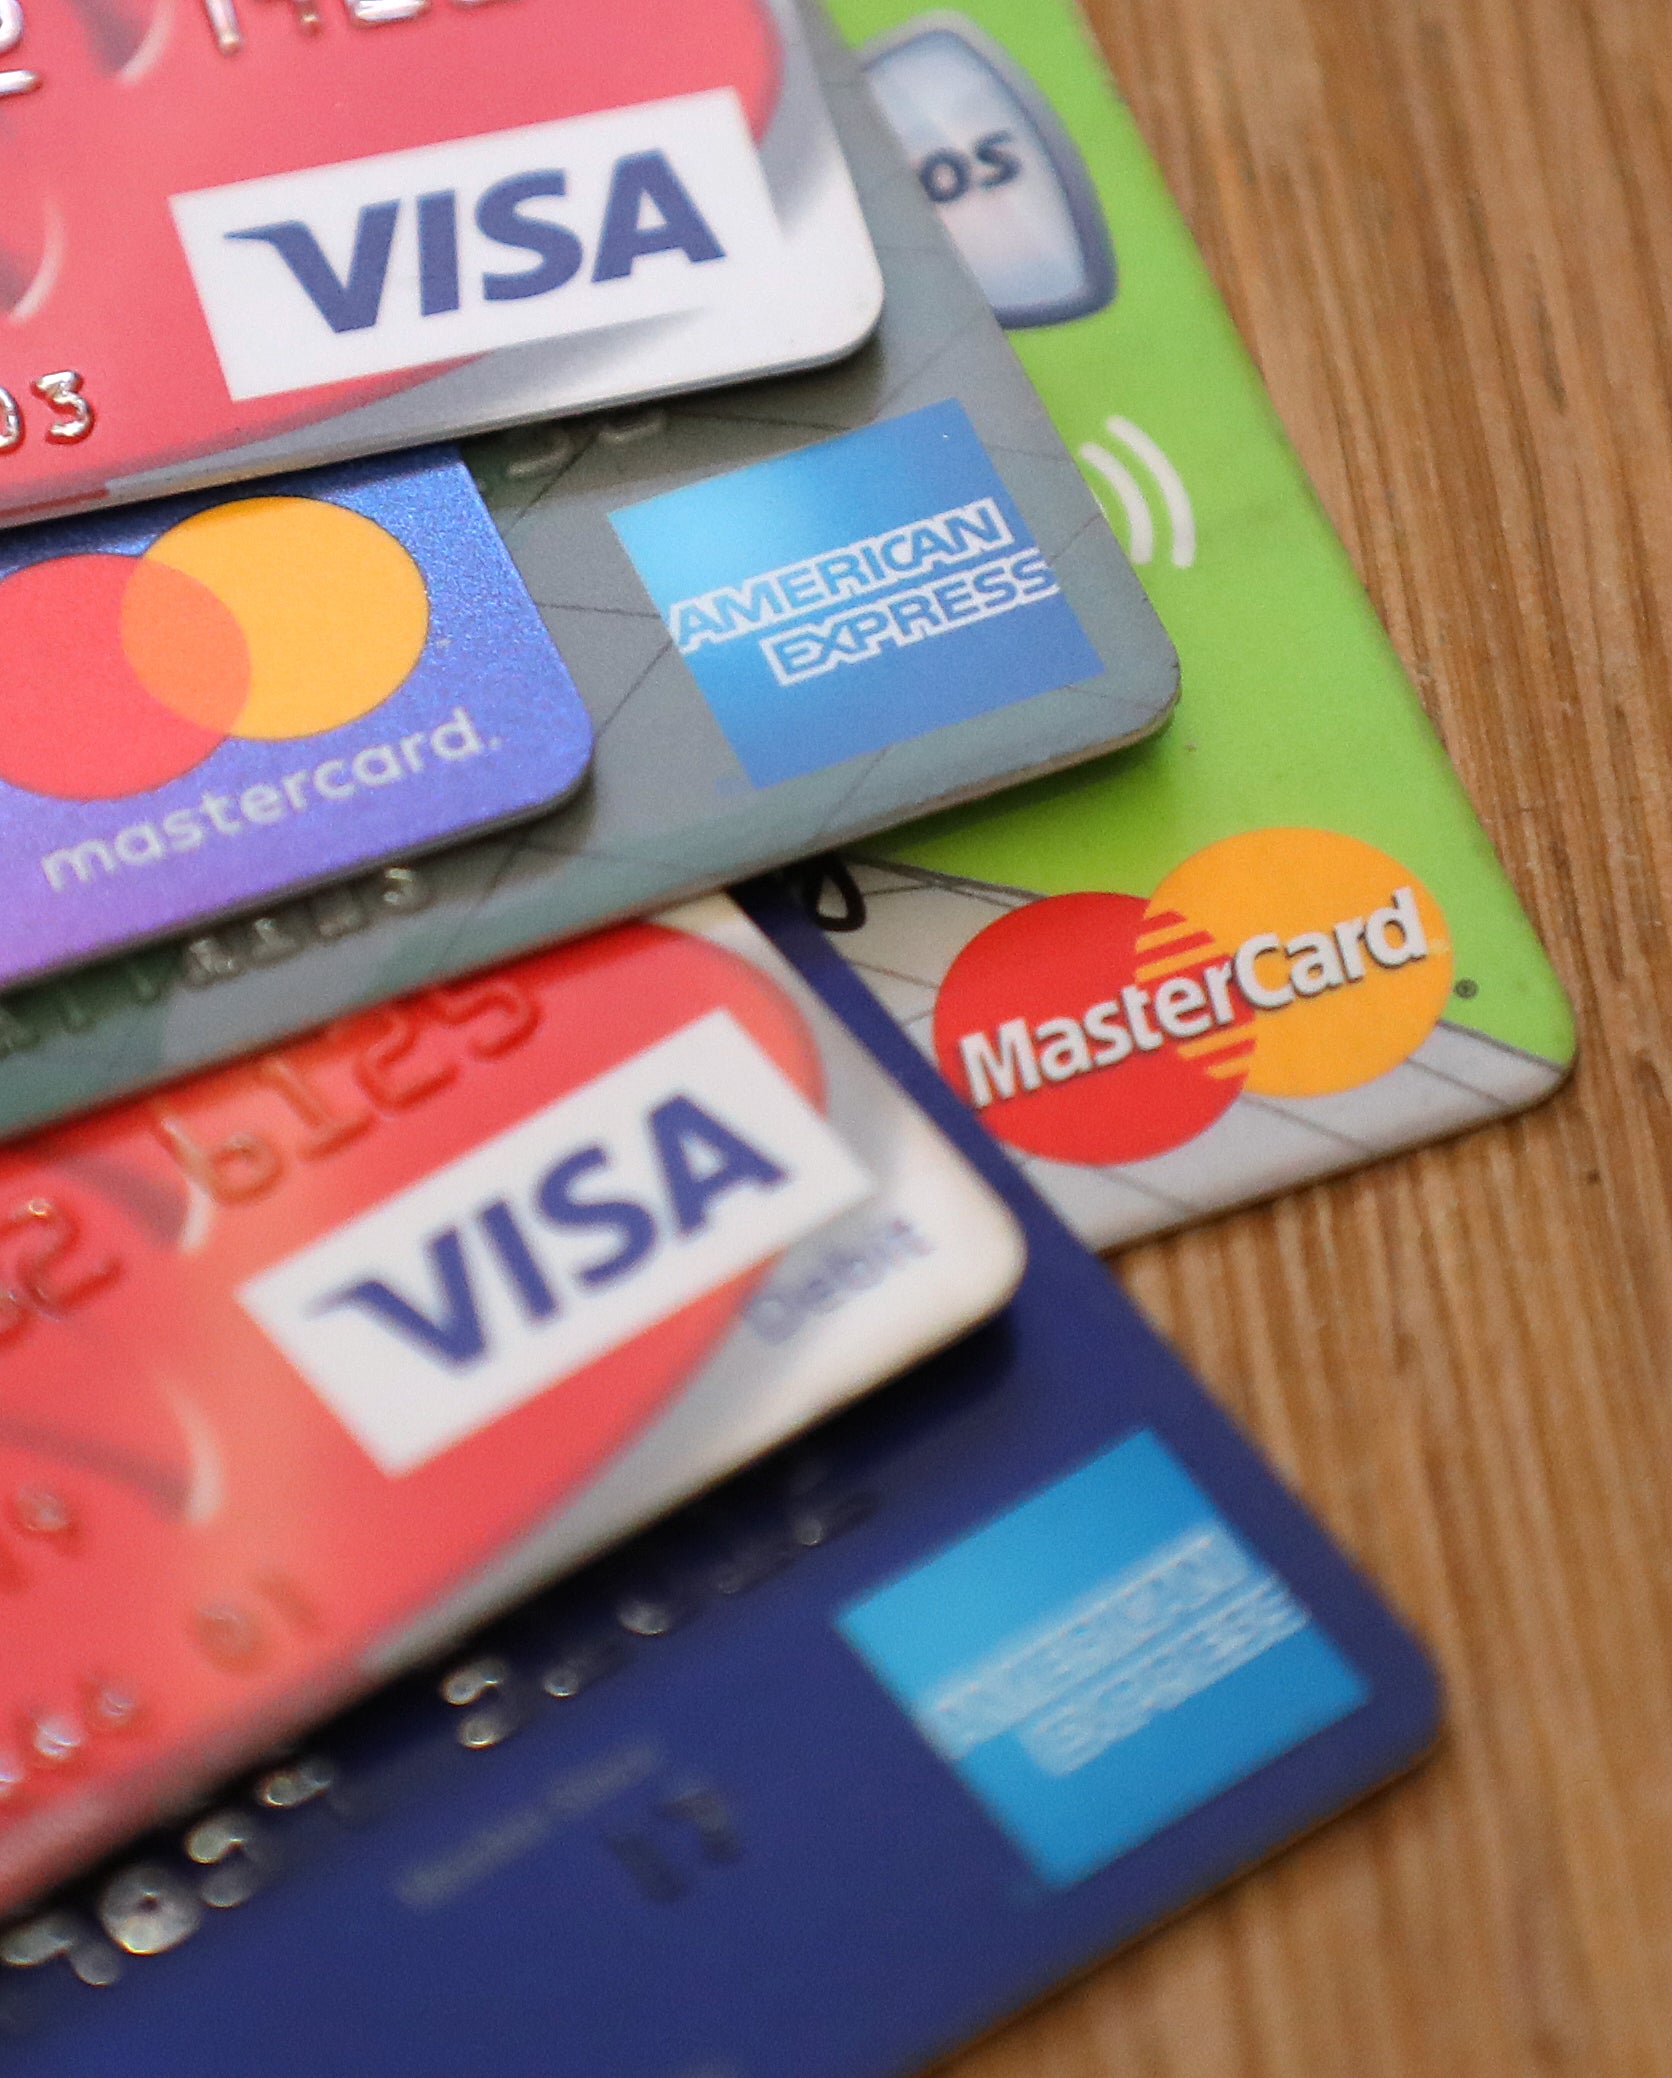 Average credit card and personal loan rates are on the increase as households grapple with the rising cost of living, according to Moneyfacts.co.uk (Andrew Matthews/PA)